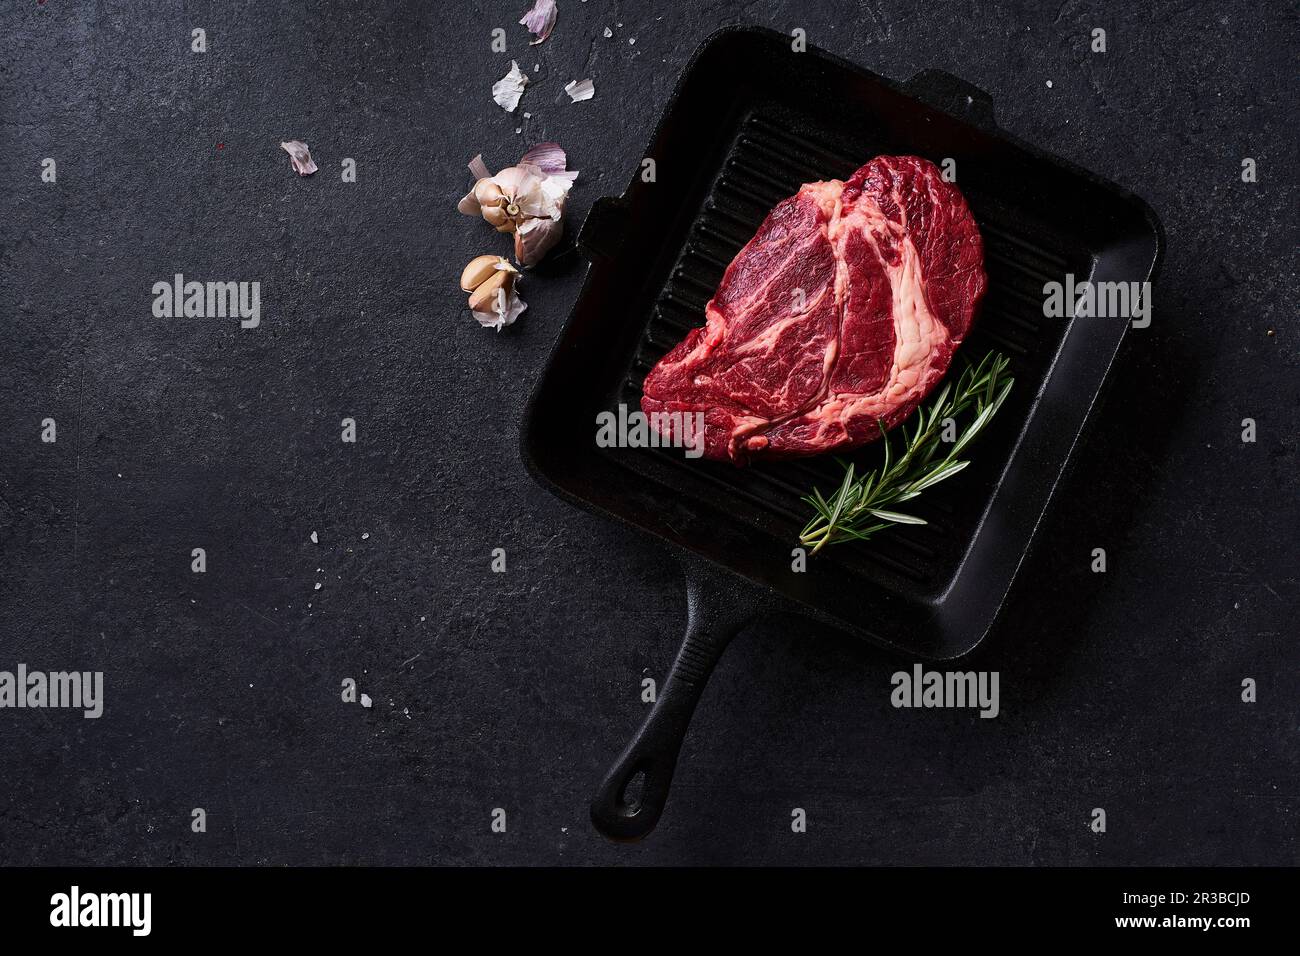 Black Angus prime beef chuck roll steak on cast iron grill skillet with fresh rosemary, thyme, olive oil, garlic and spices Stock Photo